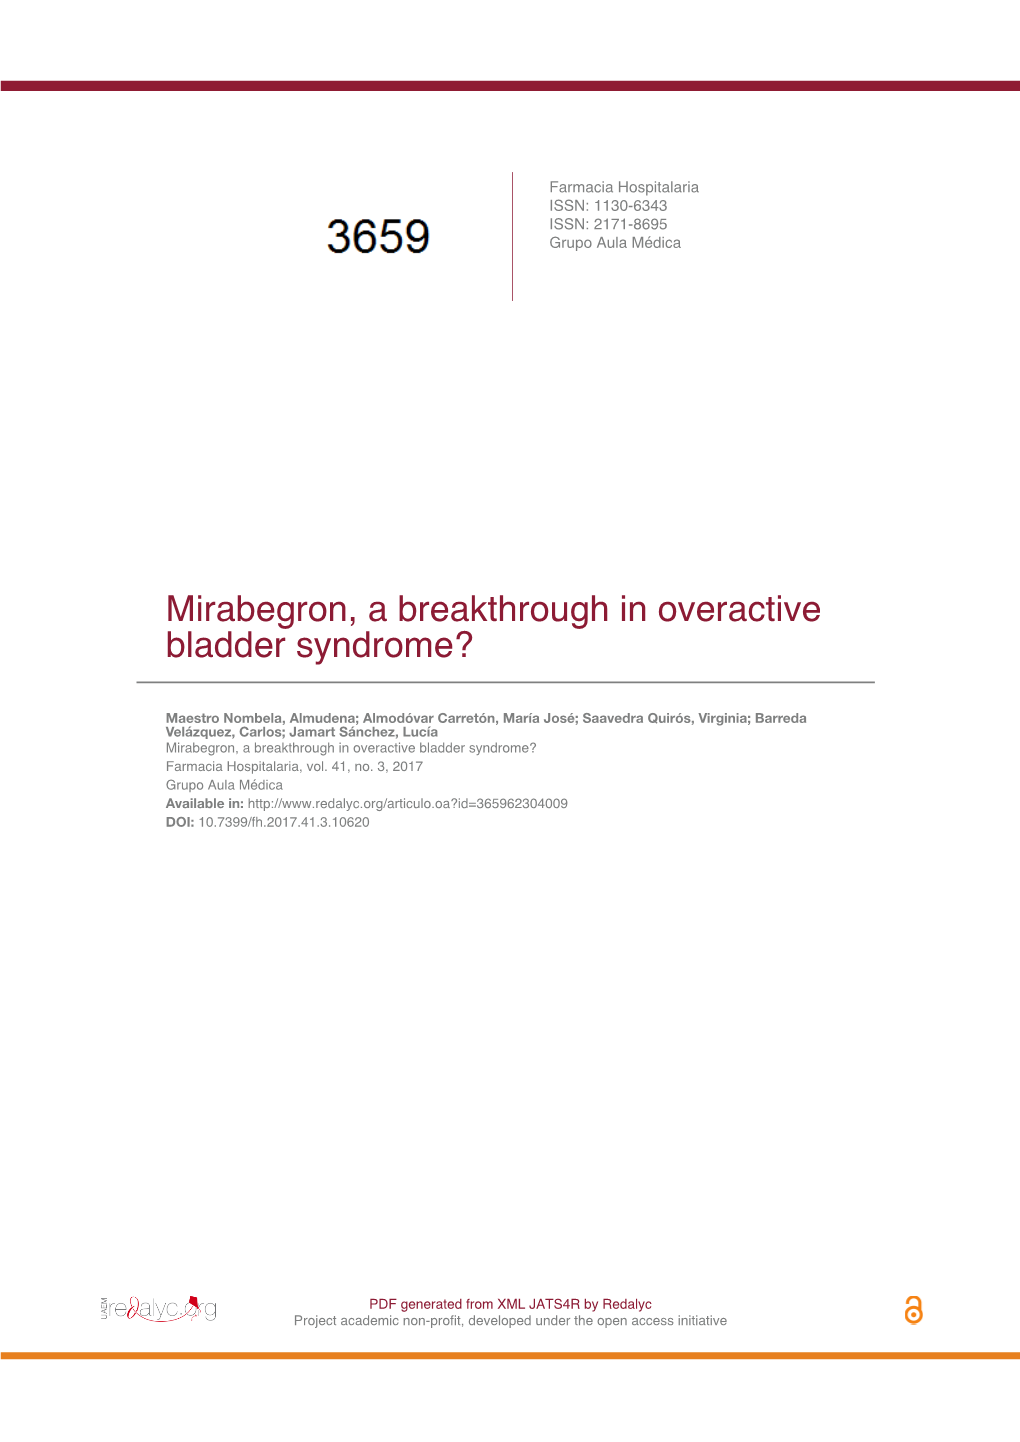 Mirabegron, a Breakthrough in Overactive Bladder Syndrome?